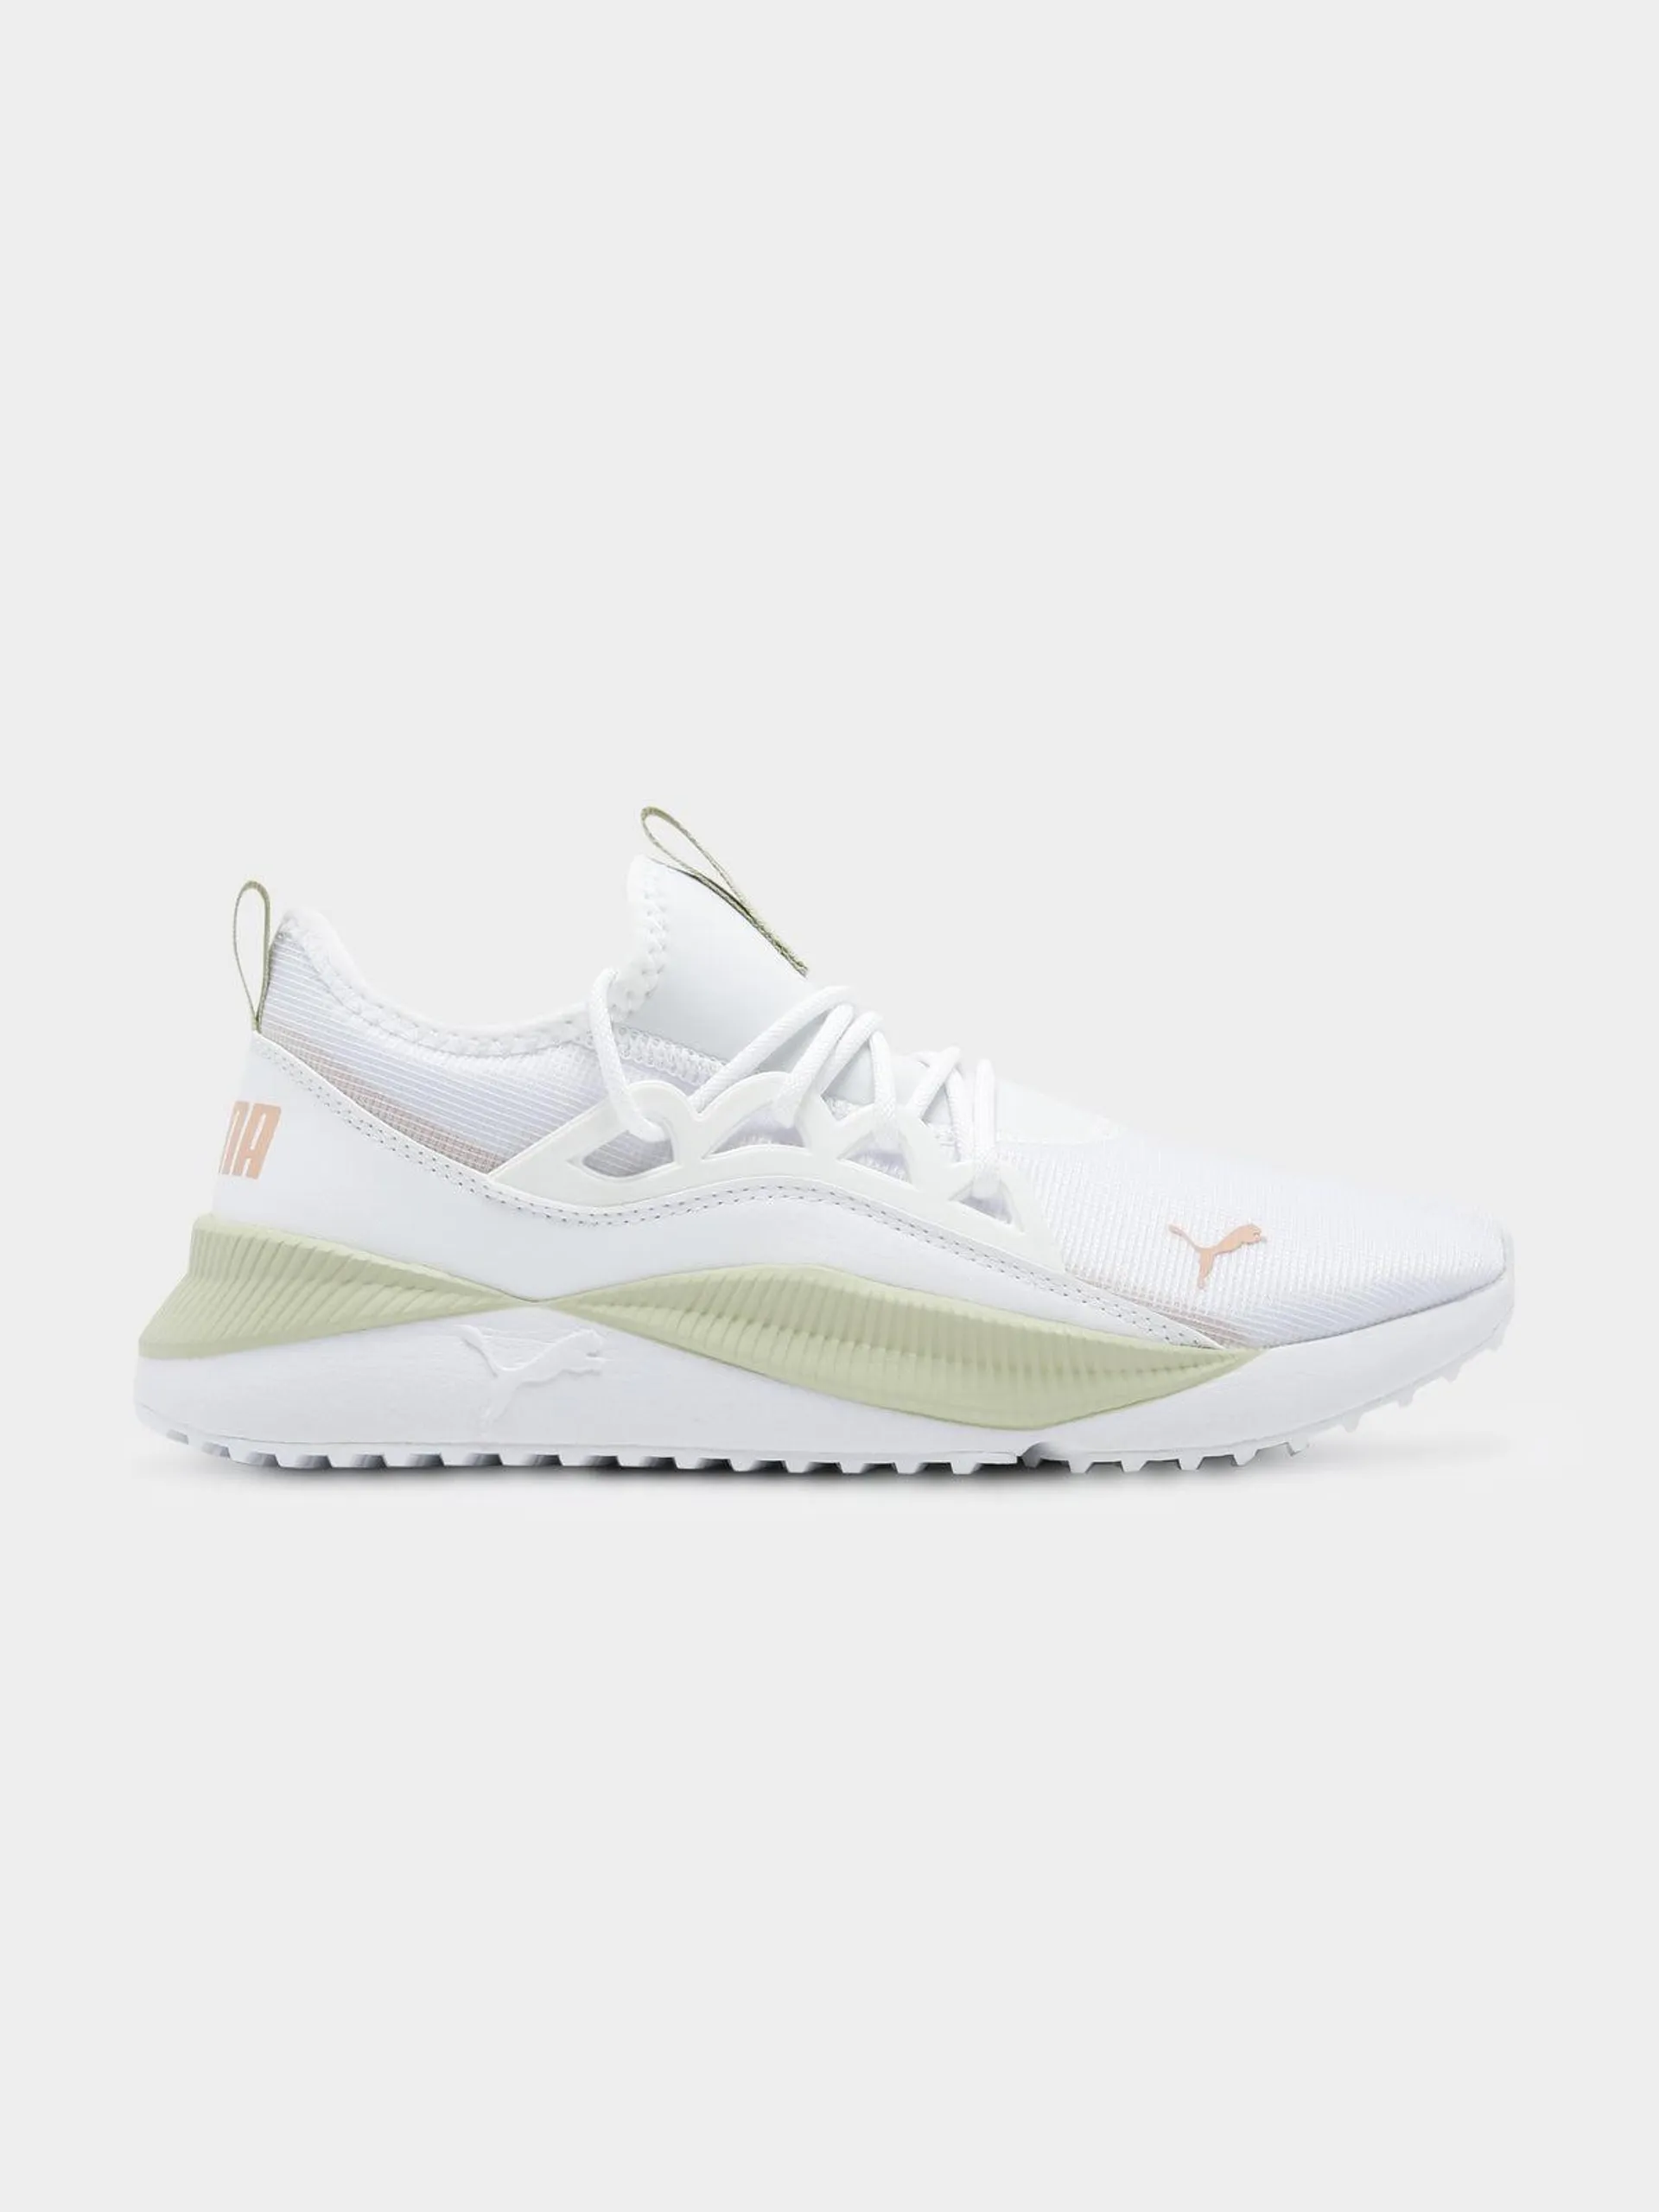 Womens Pacer Future Lux Sneakers in White & Yellow